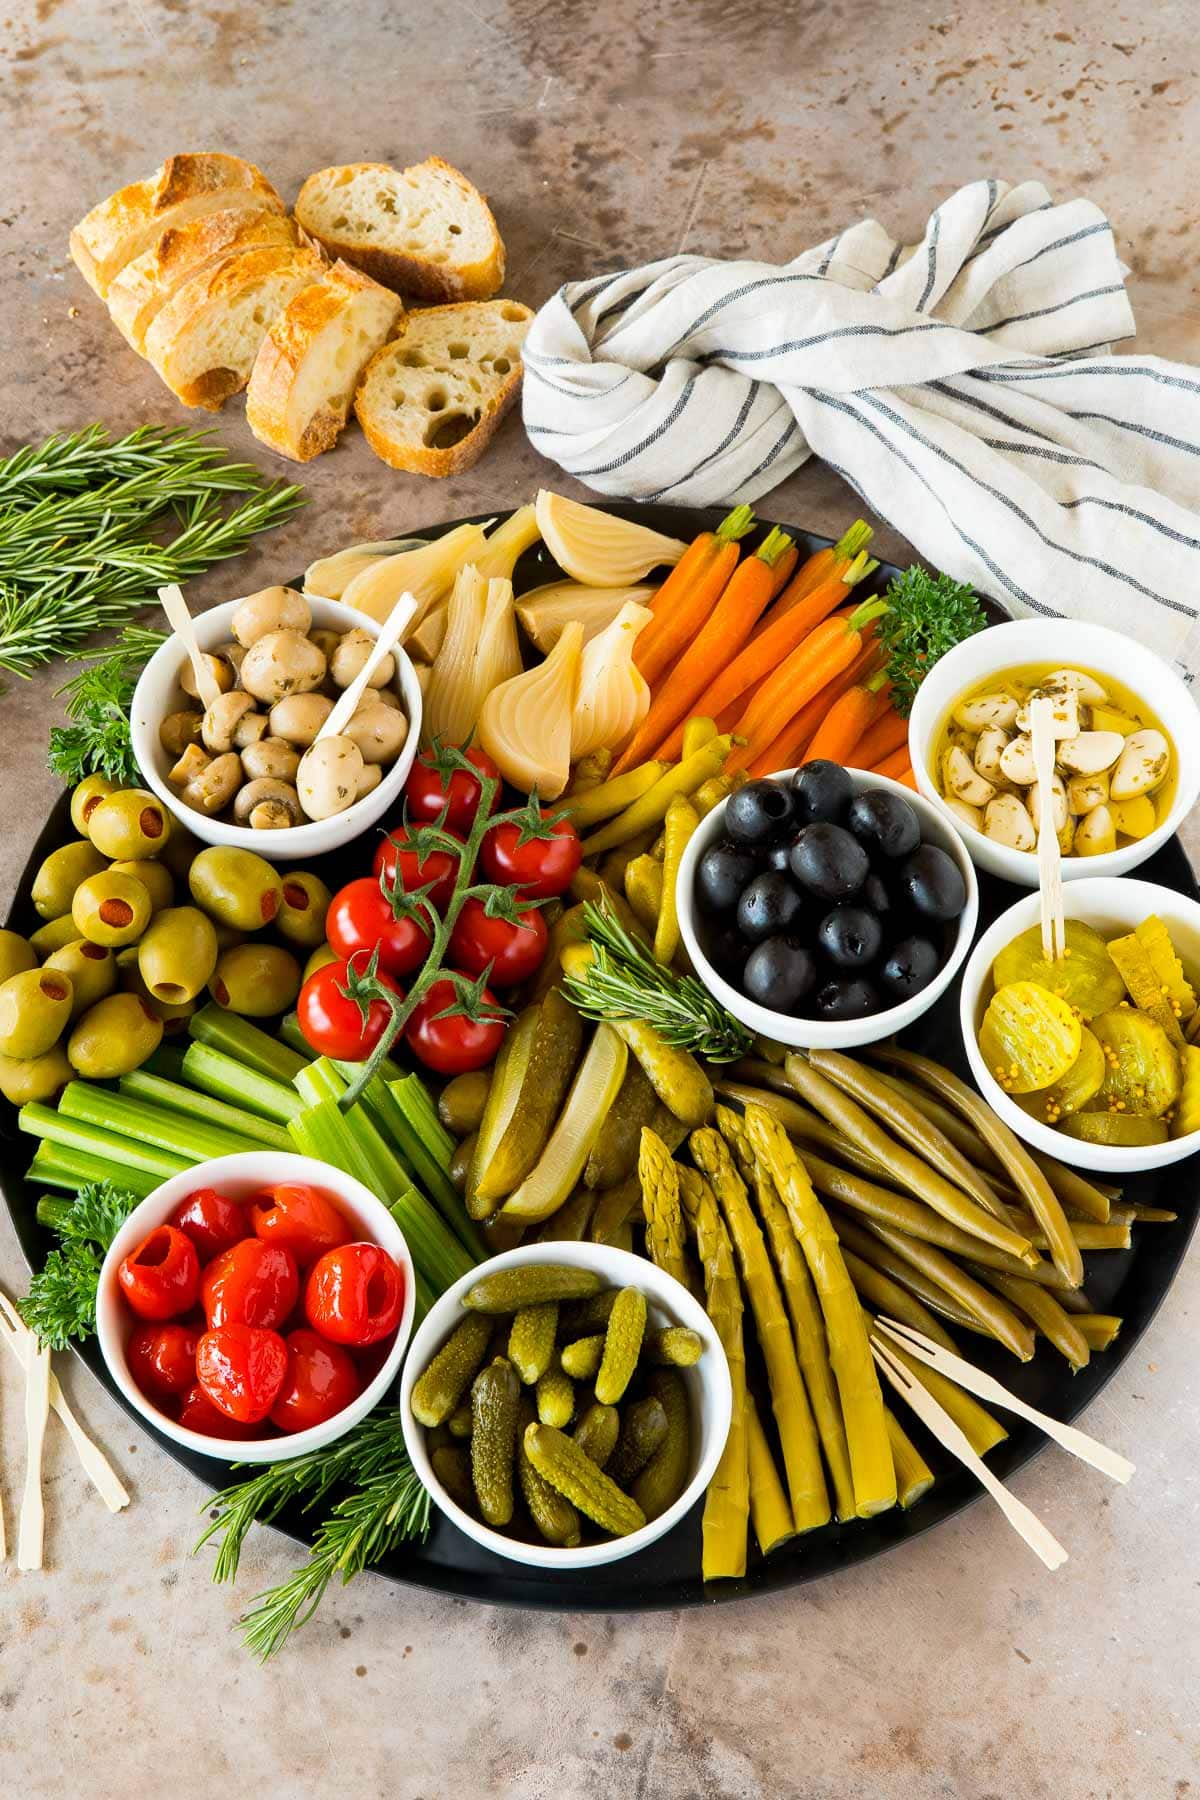 A relish platter with different types of vegetables and olives.